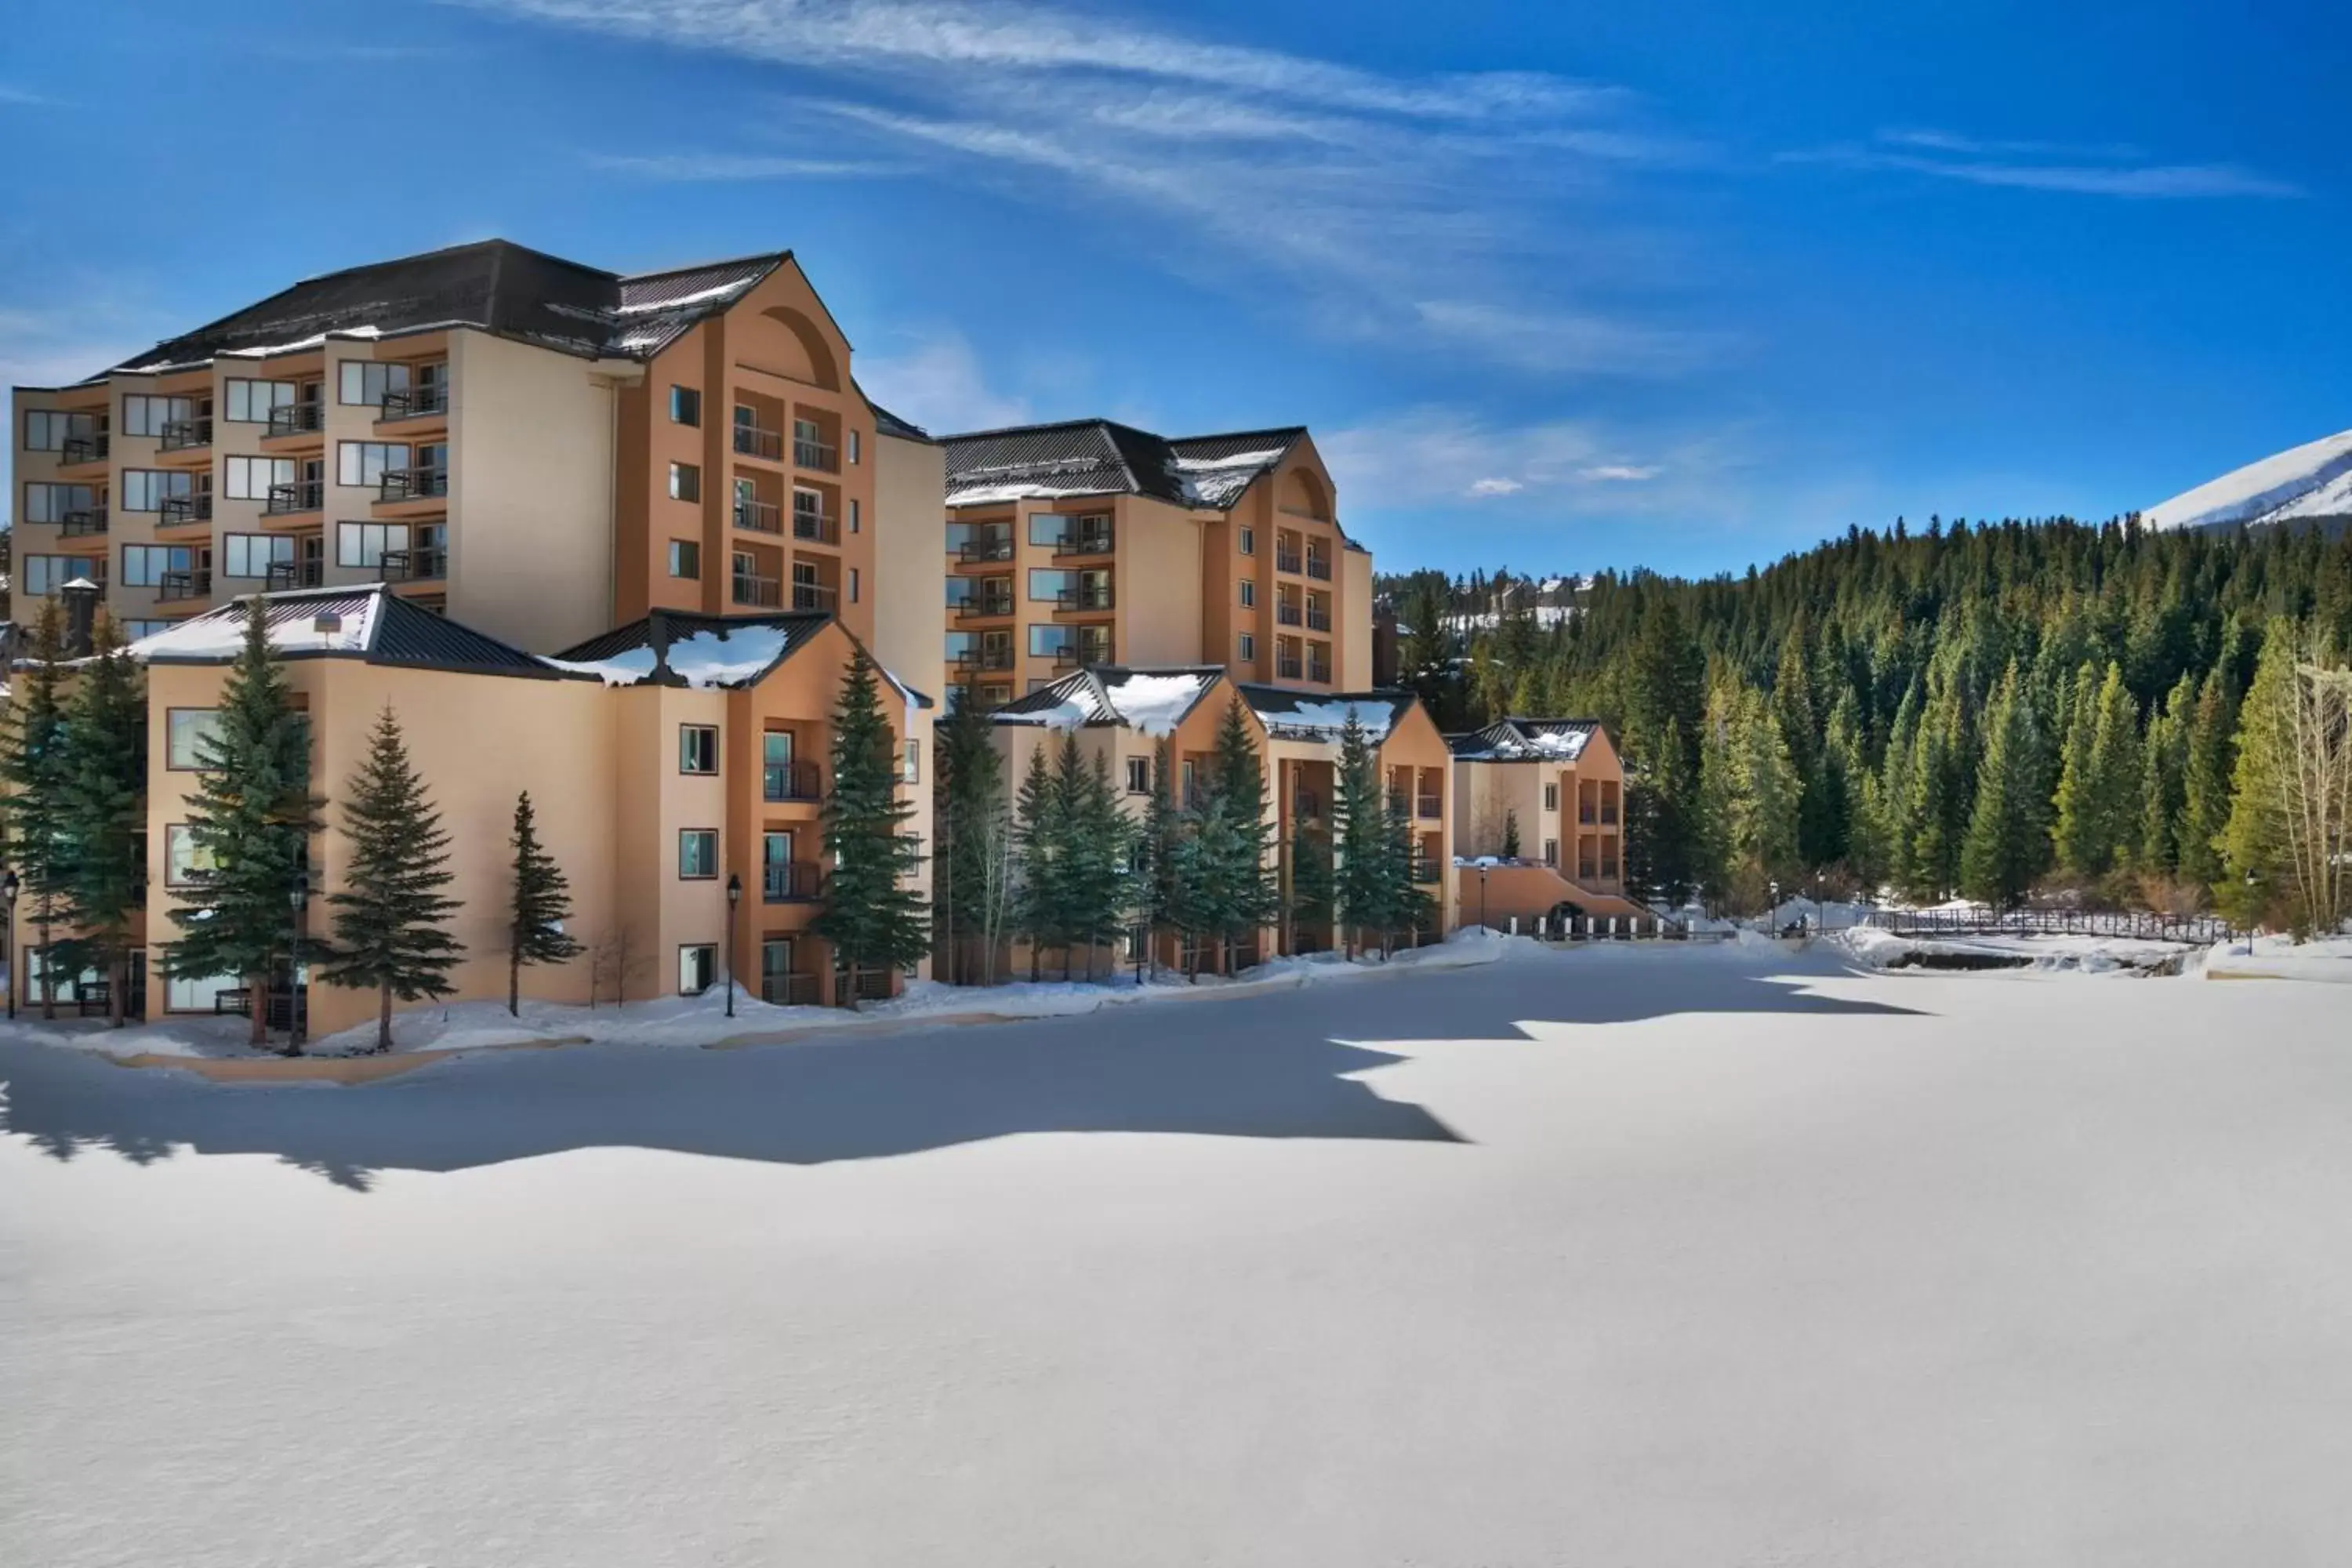 Property Building in Marriott's Mountain Valley Lodge at Breckenridge